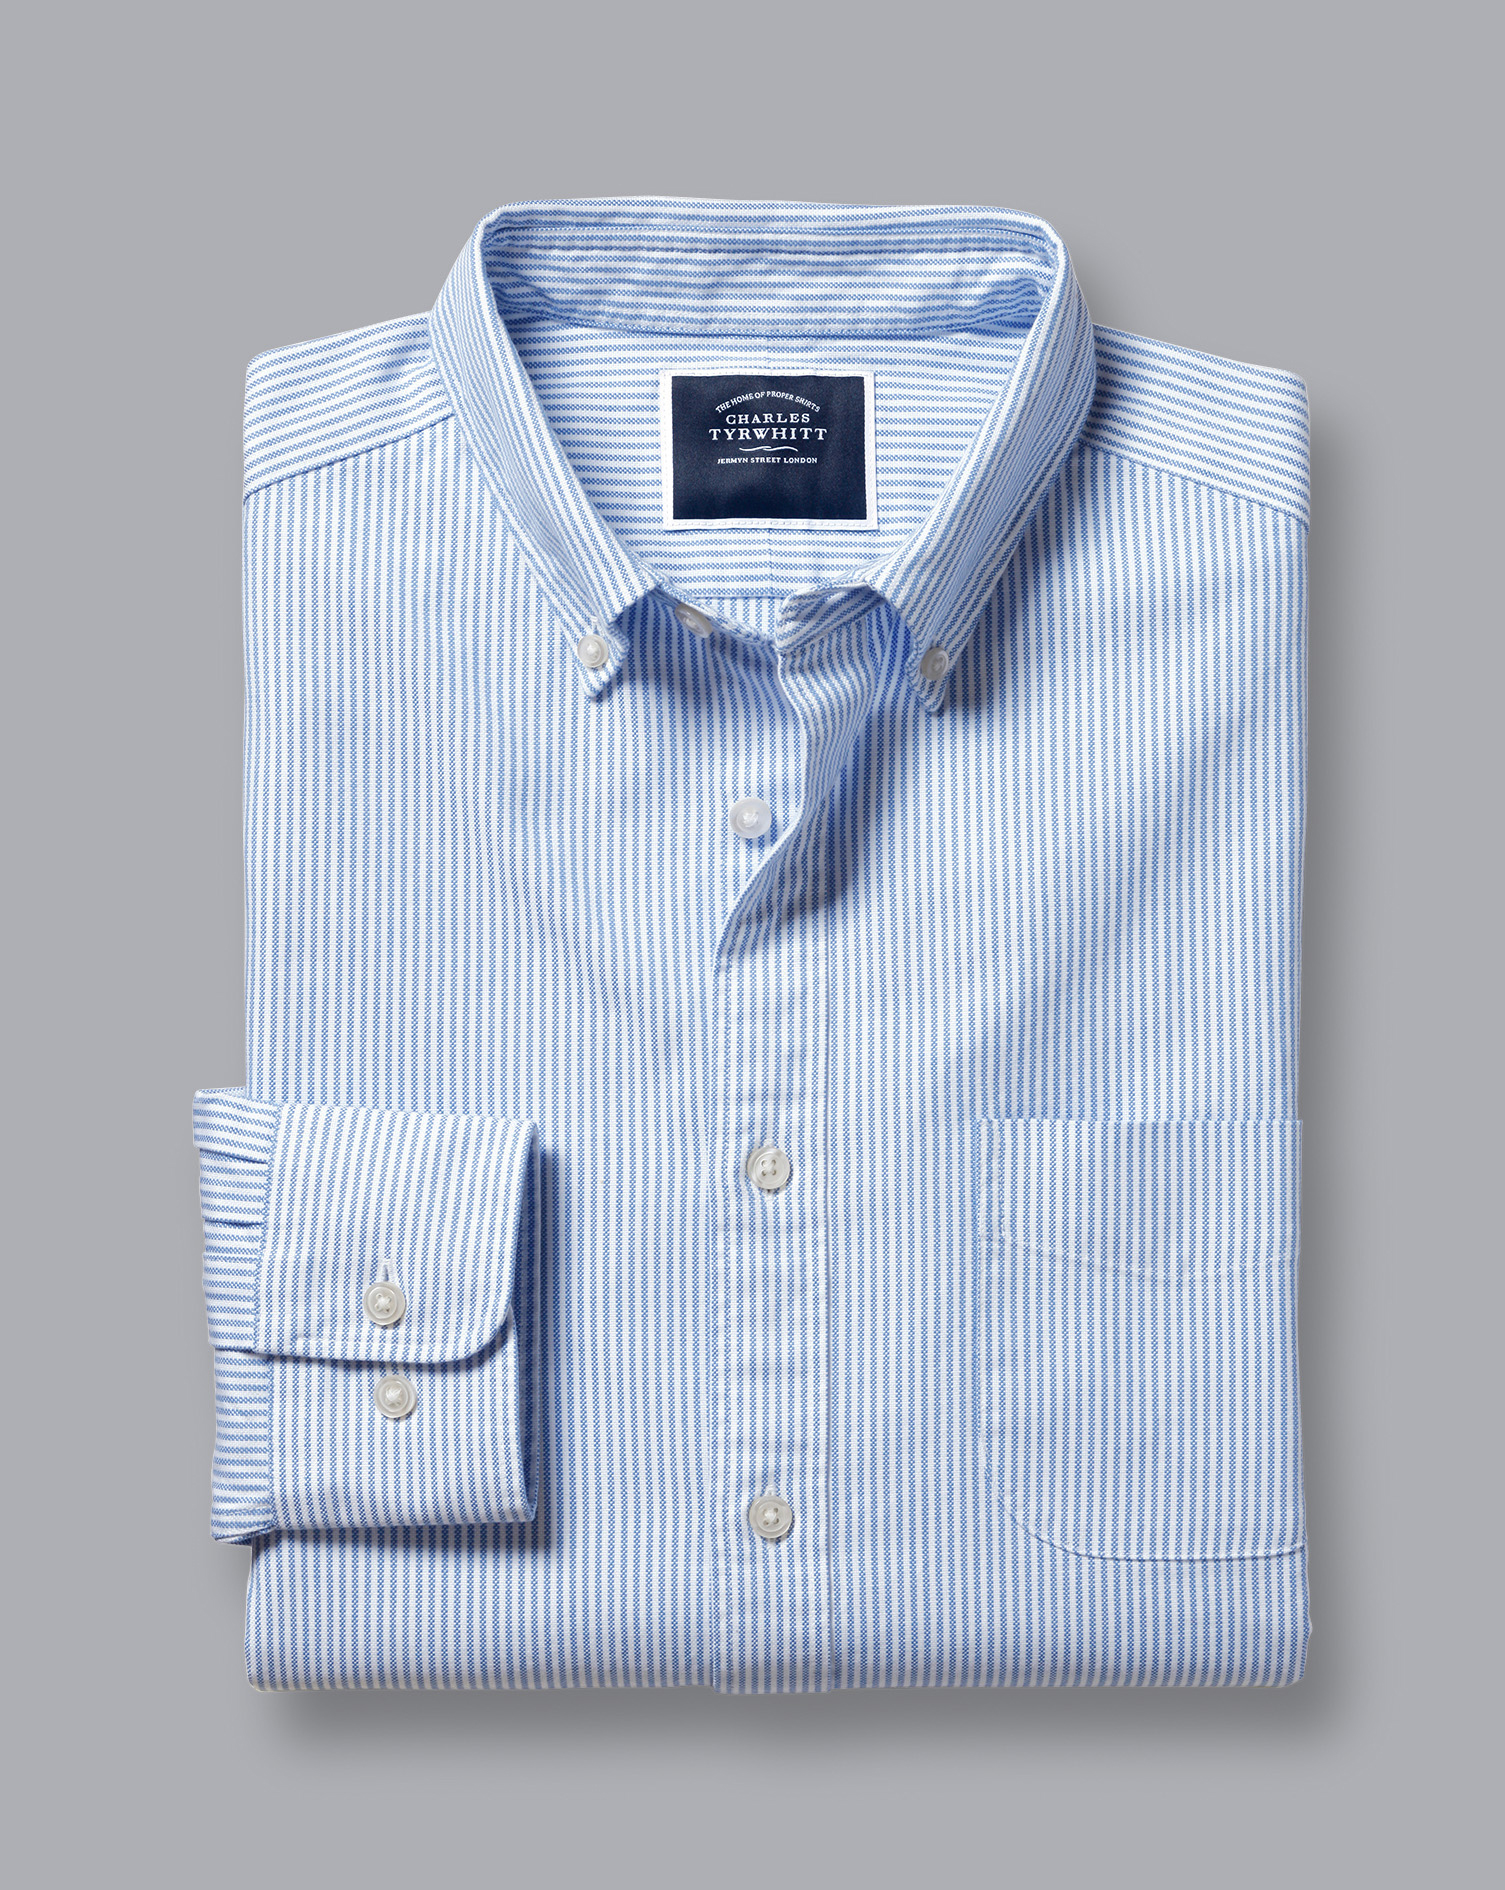 6 of the best men’s casual shirts from Charles Tyrwhitt | The Coolector